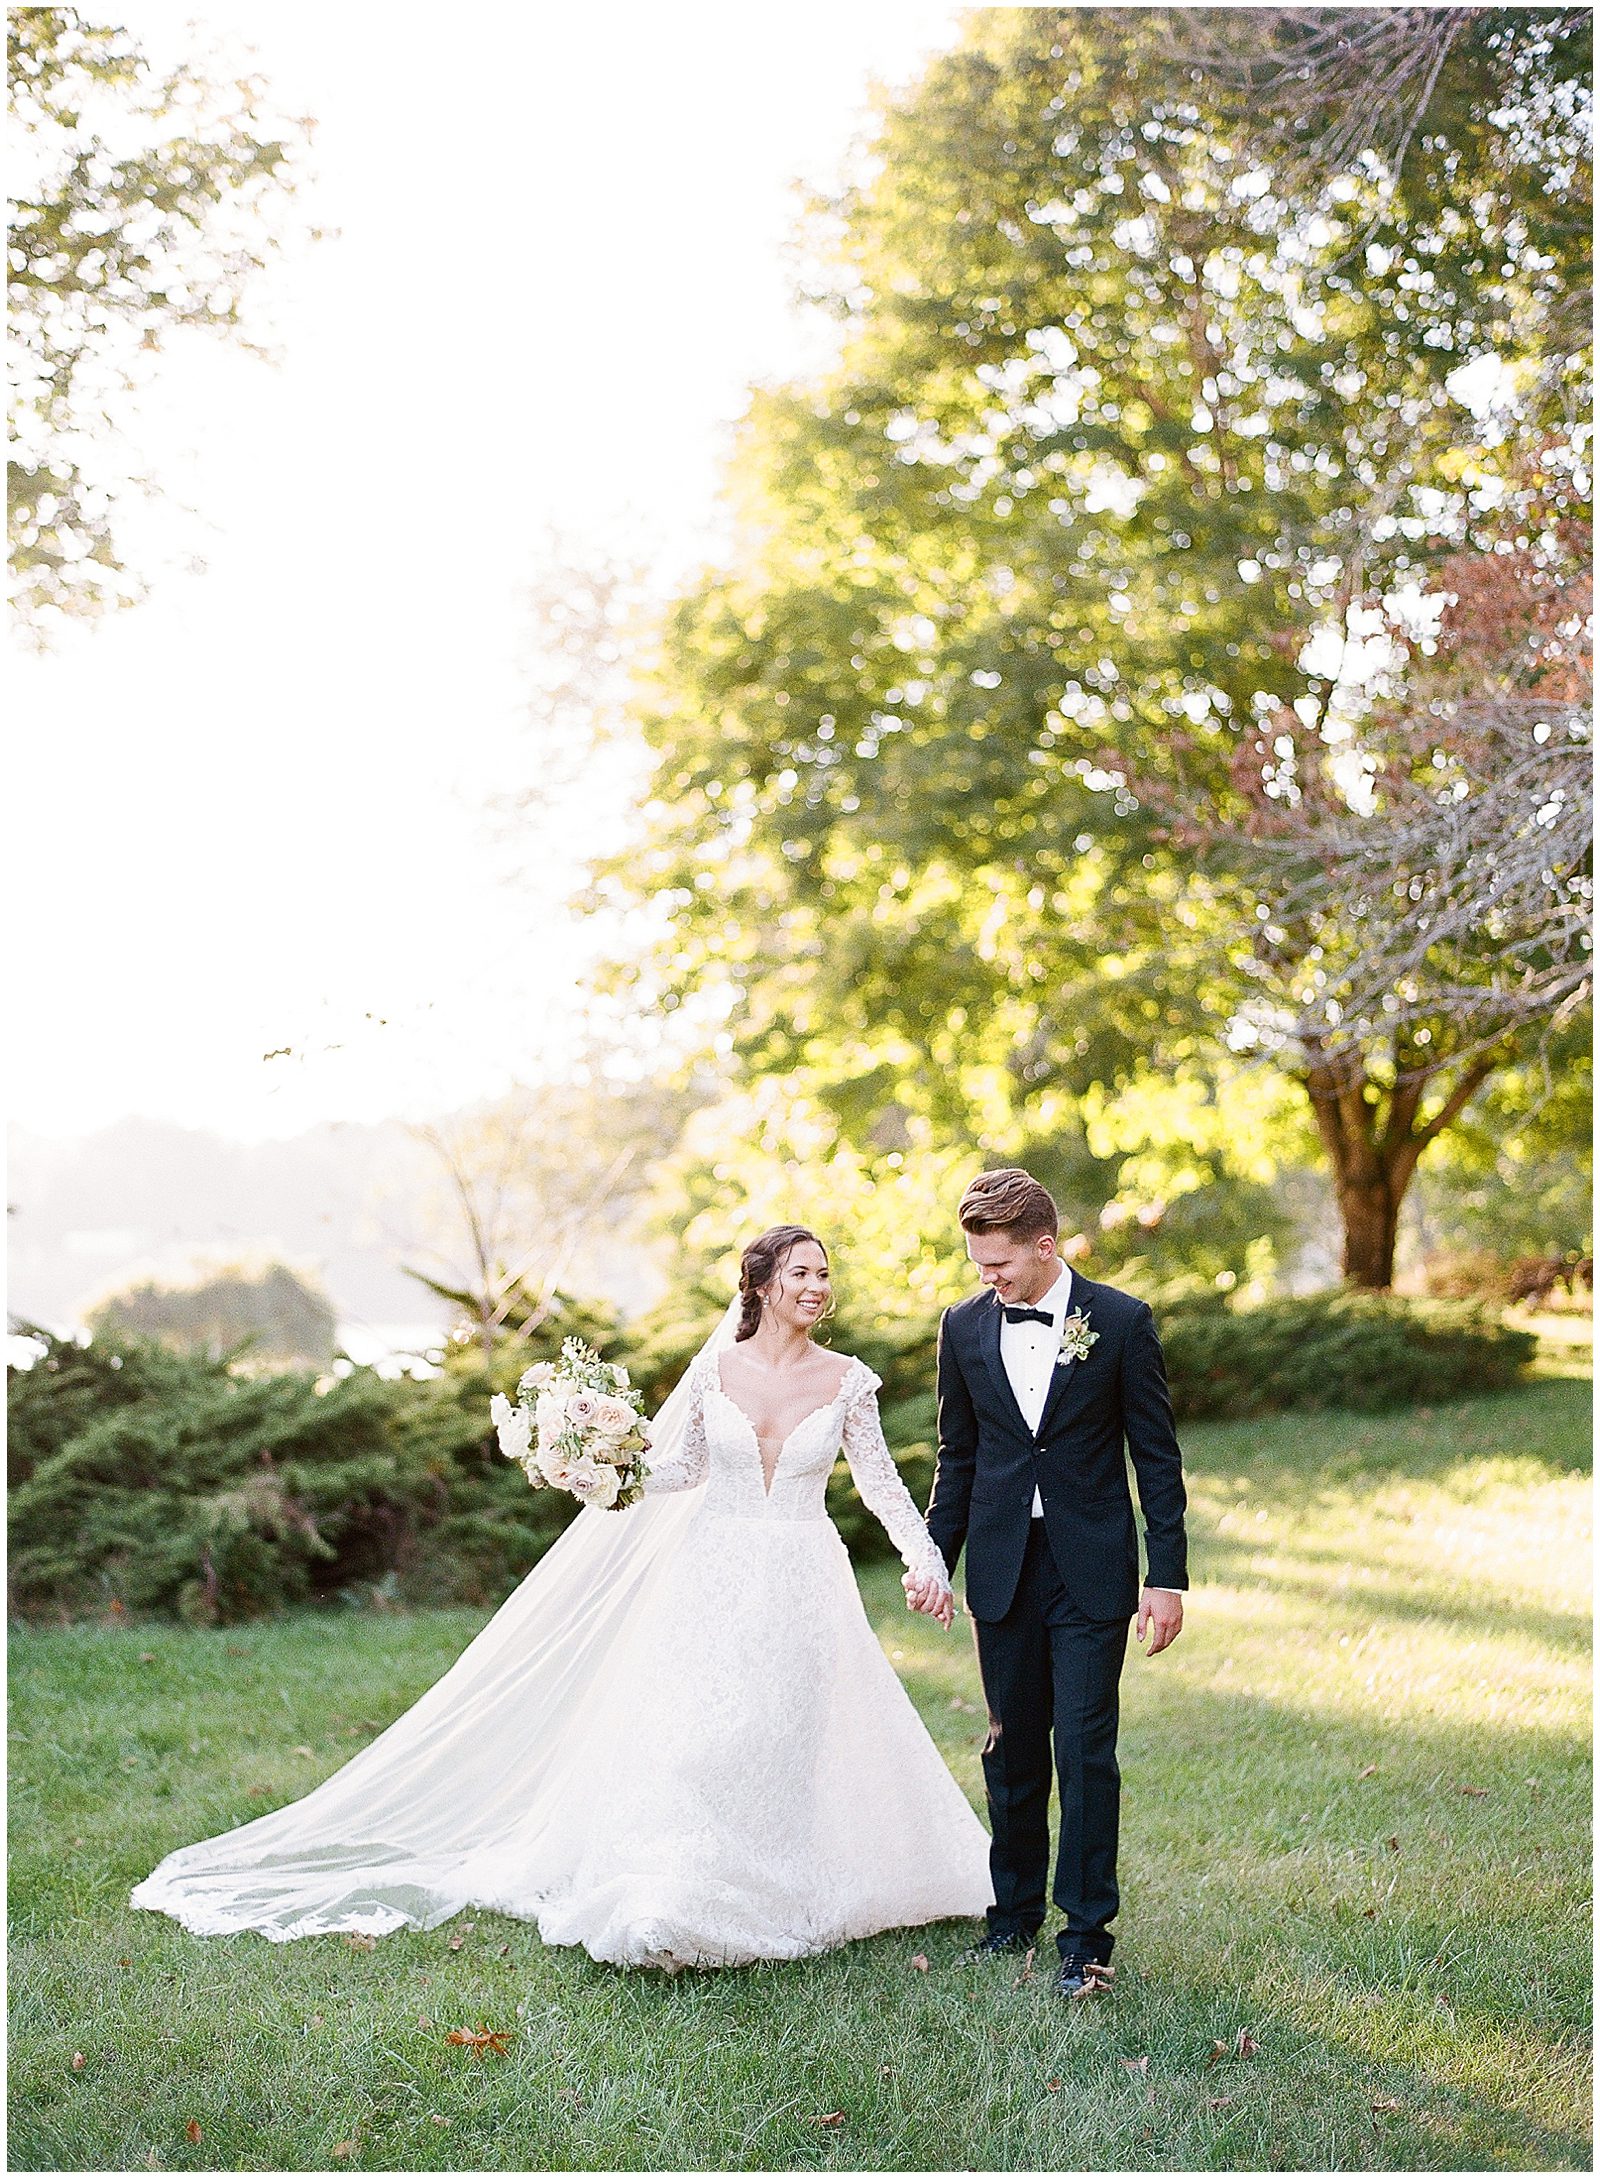 Tennessee Wedding Photographer Captures Bride and Groom Walking Holding Hands Photo